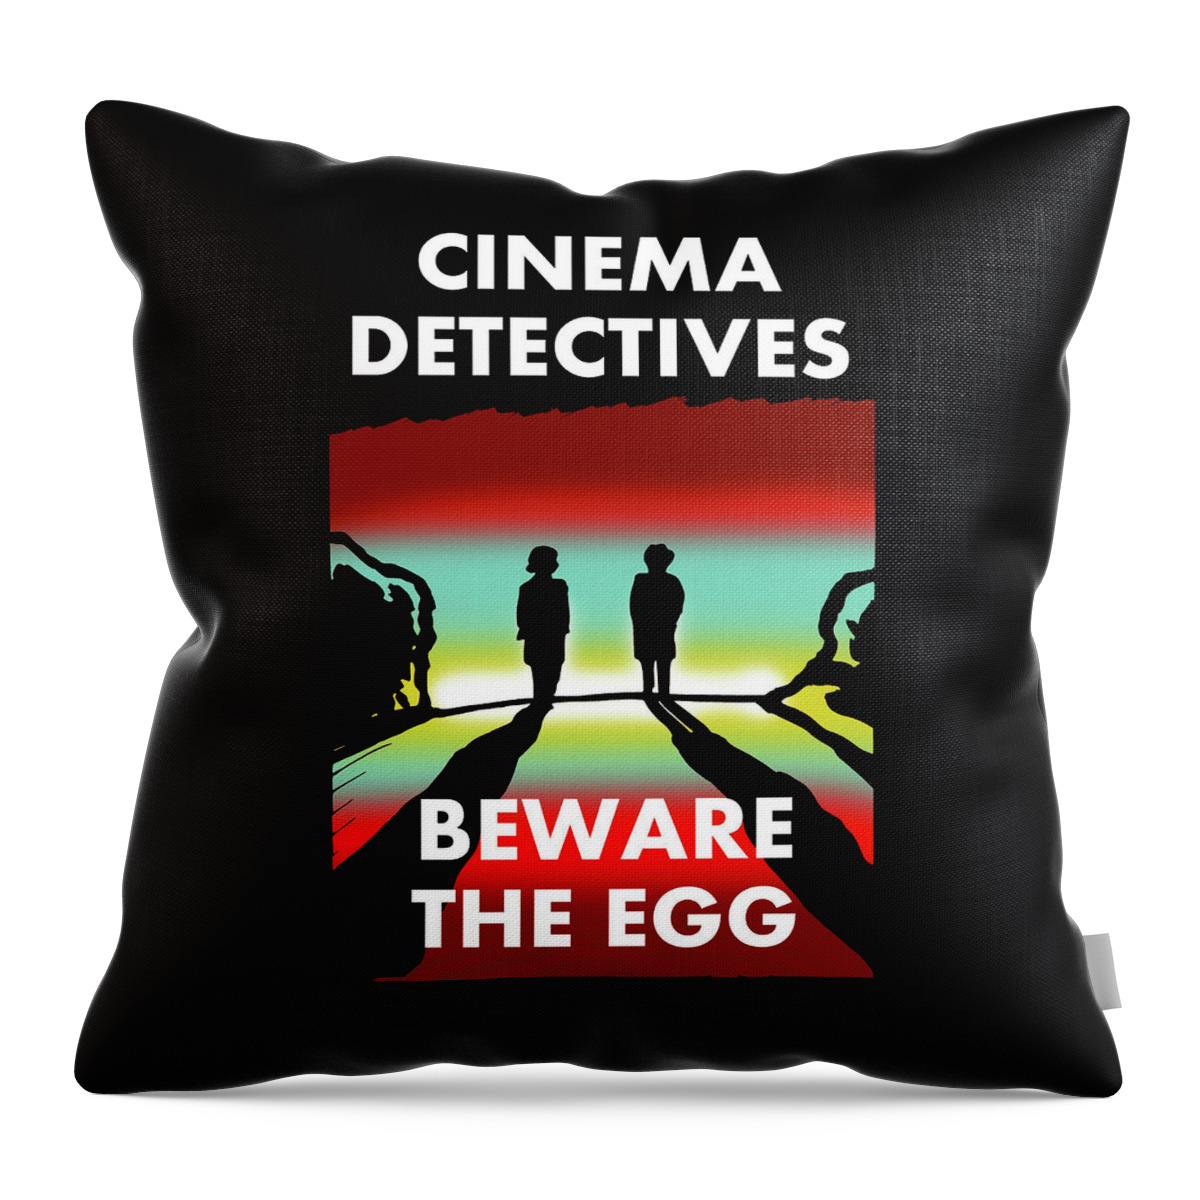 Cinema Detectives Throw Pillow featuring the digital art Beware The Egg by Chris Reynolds